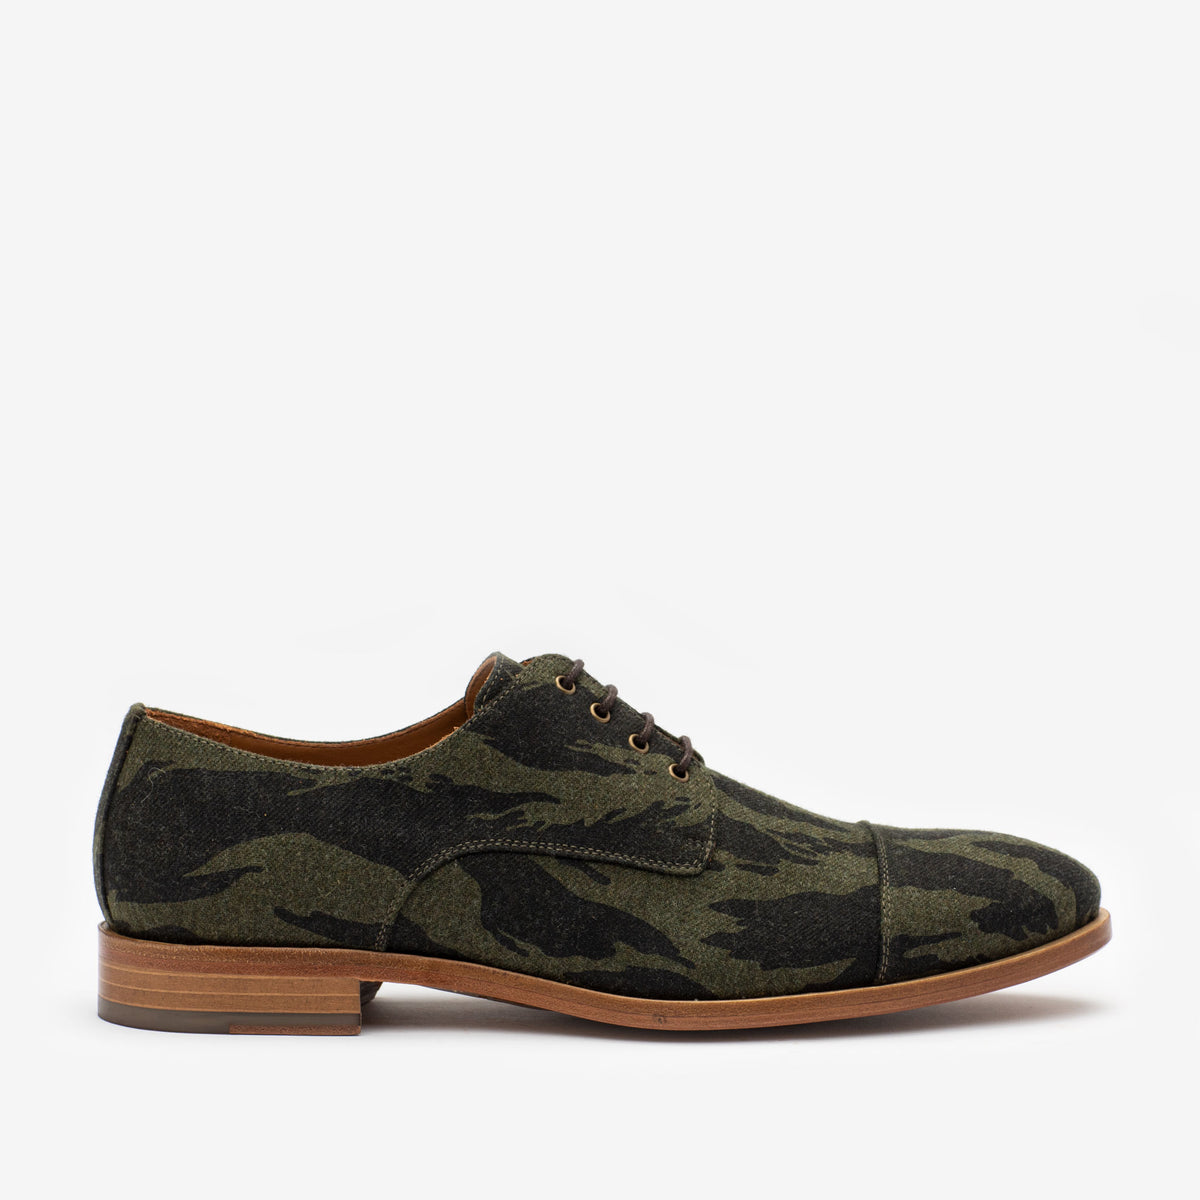 The Kennedy Shoe in Camo